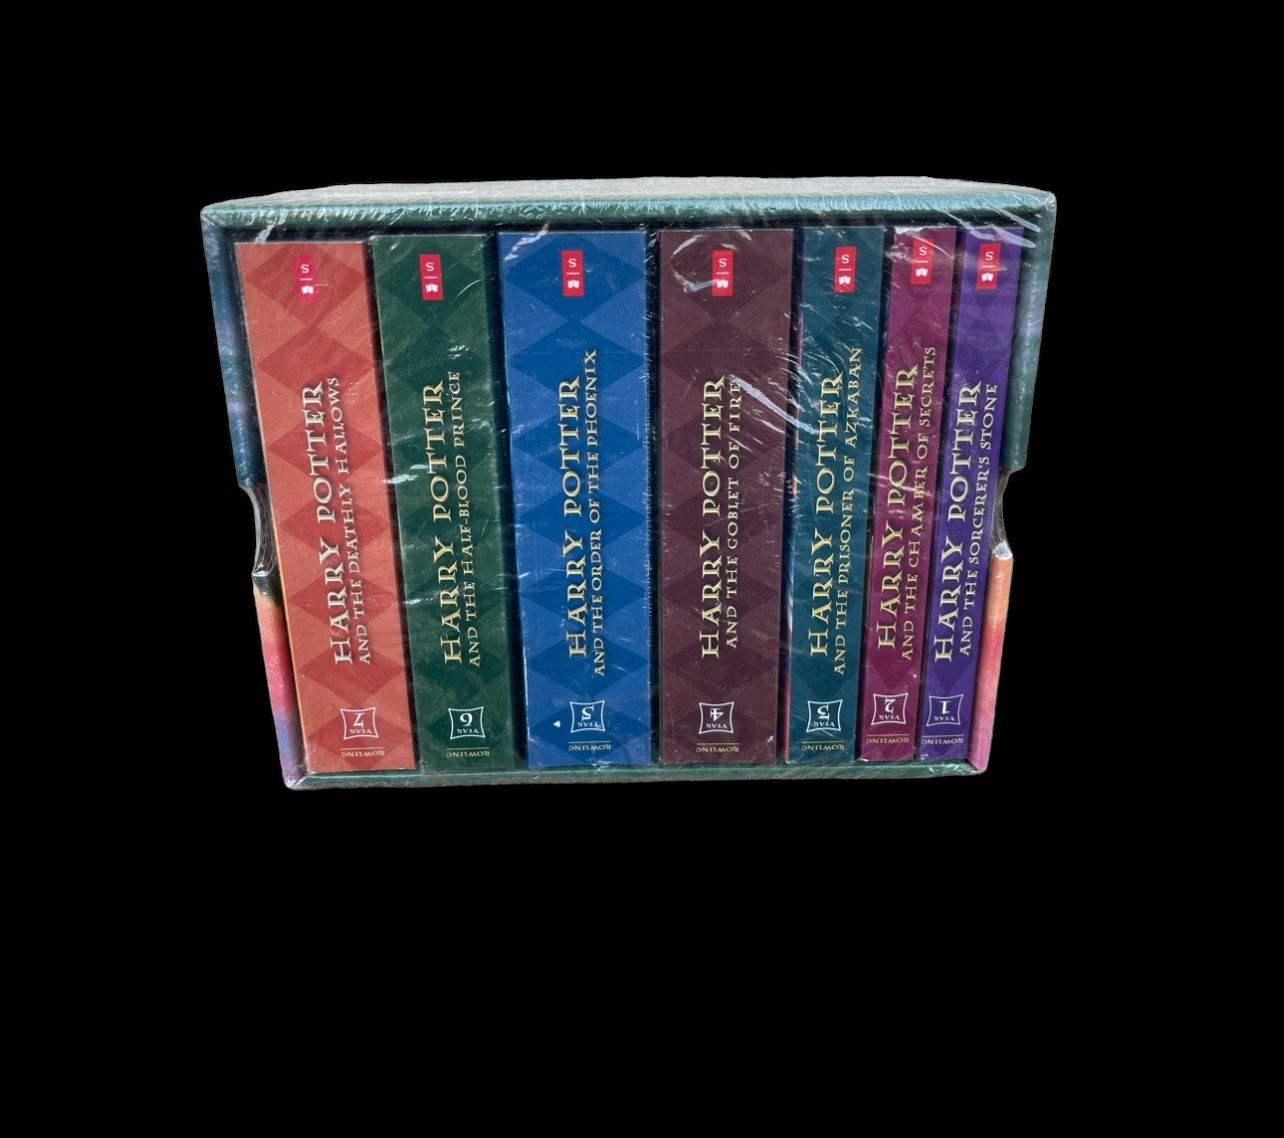 Harry Potter Complete Series Boxed Set Paperback Collection JK Rowling All 7 Books! New! 